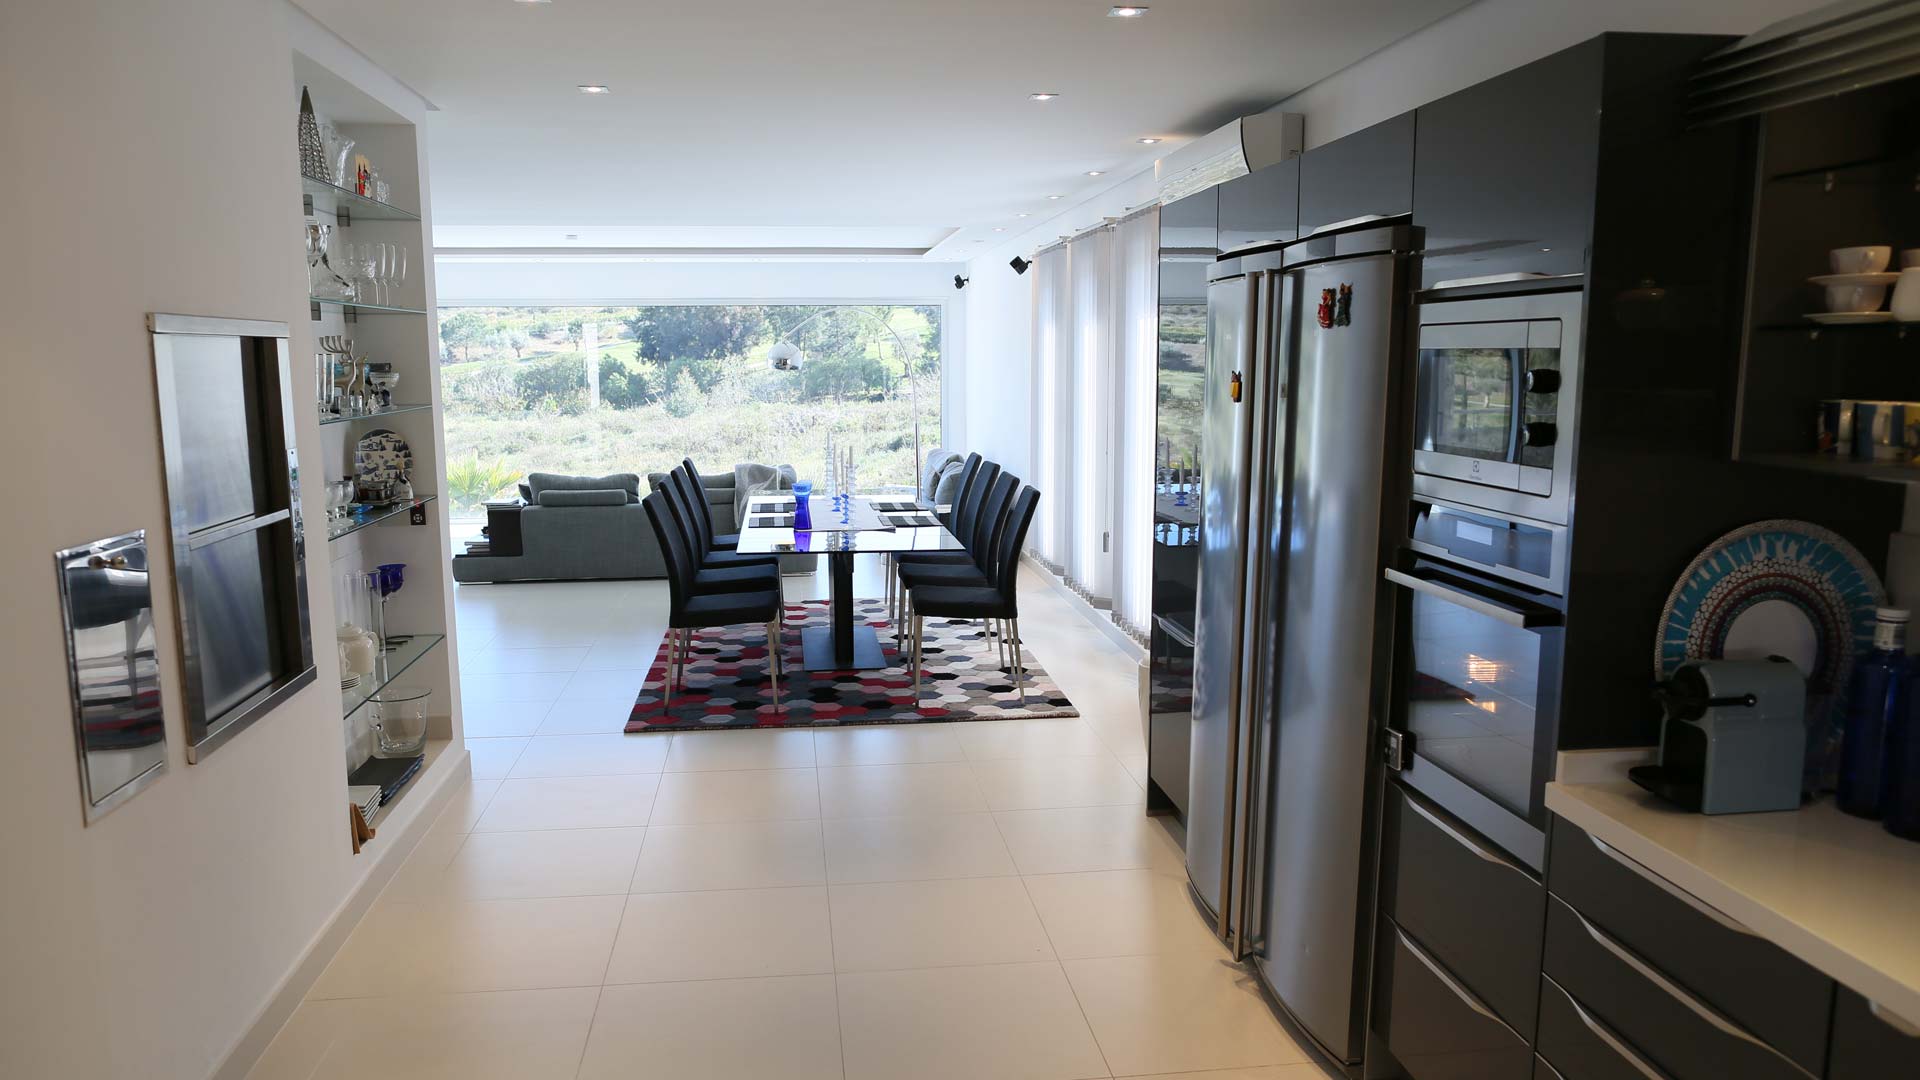 38.-Kitchen-to-the-dining-area